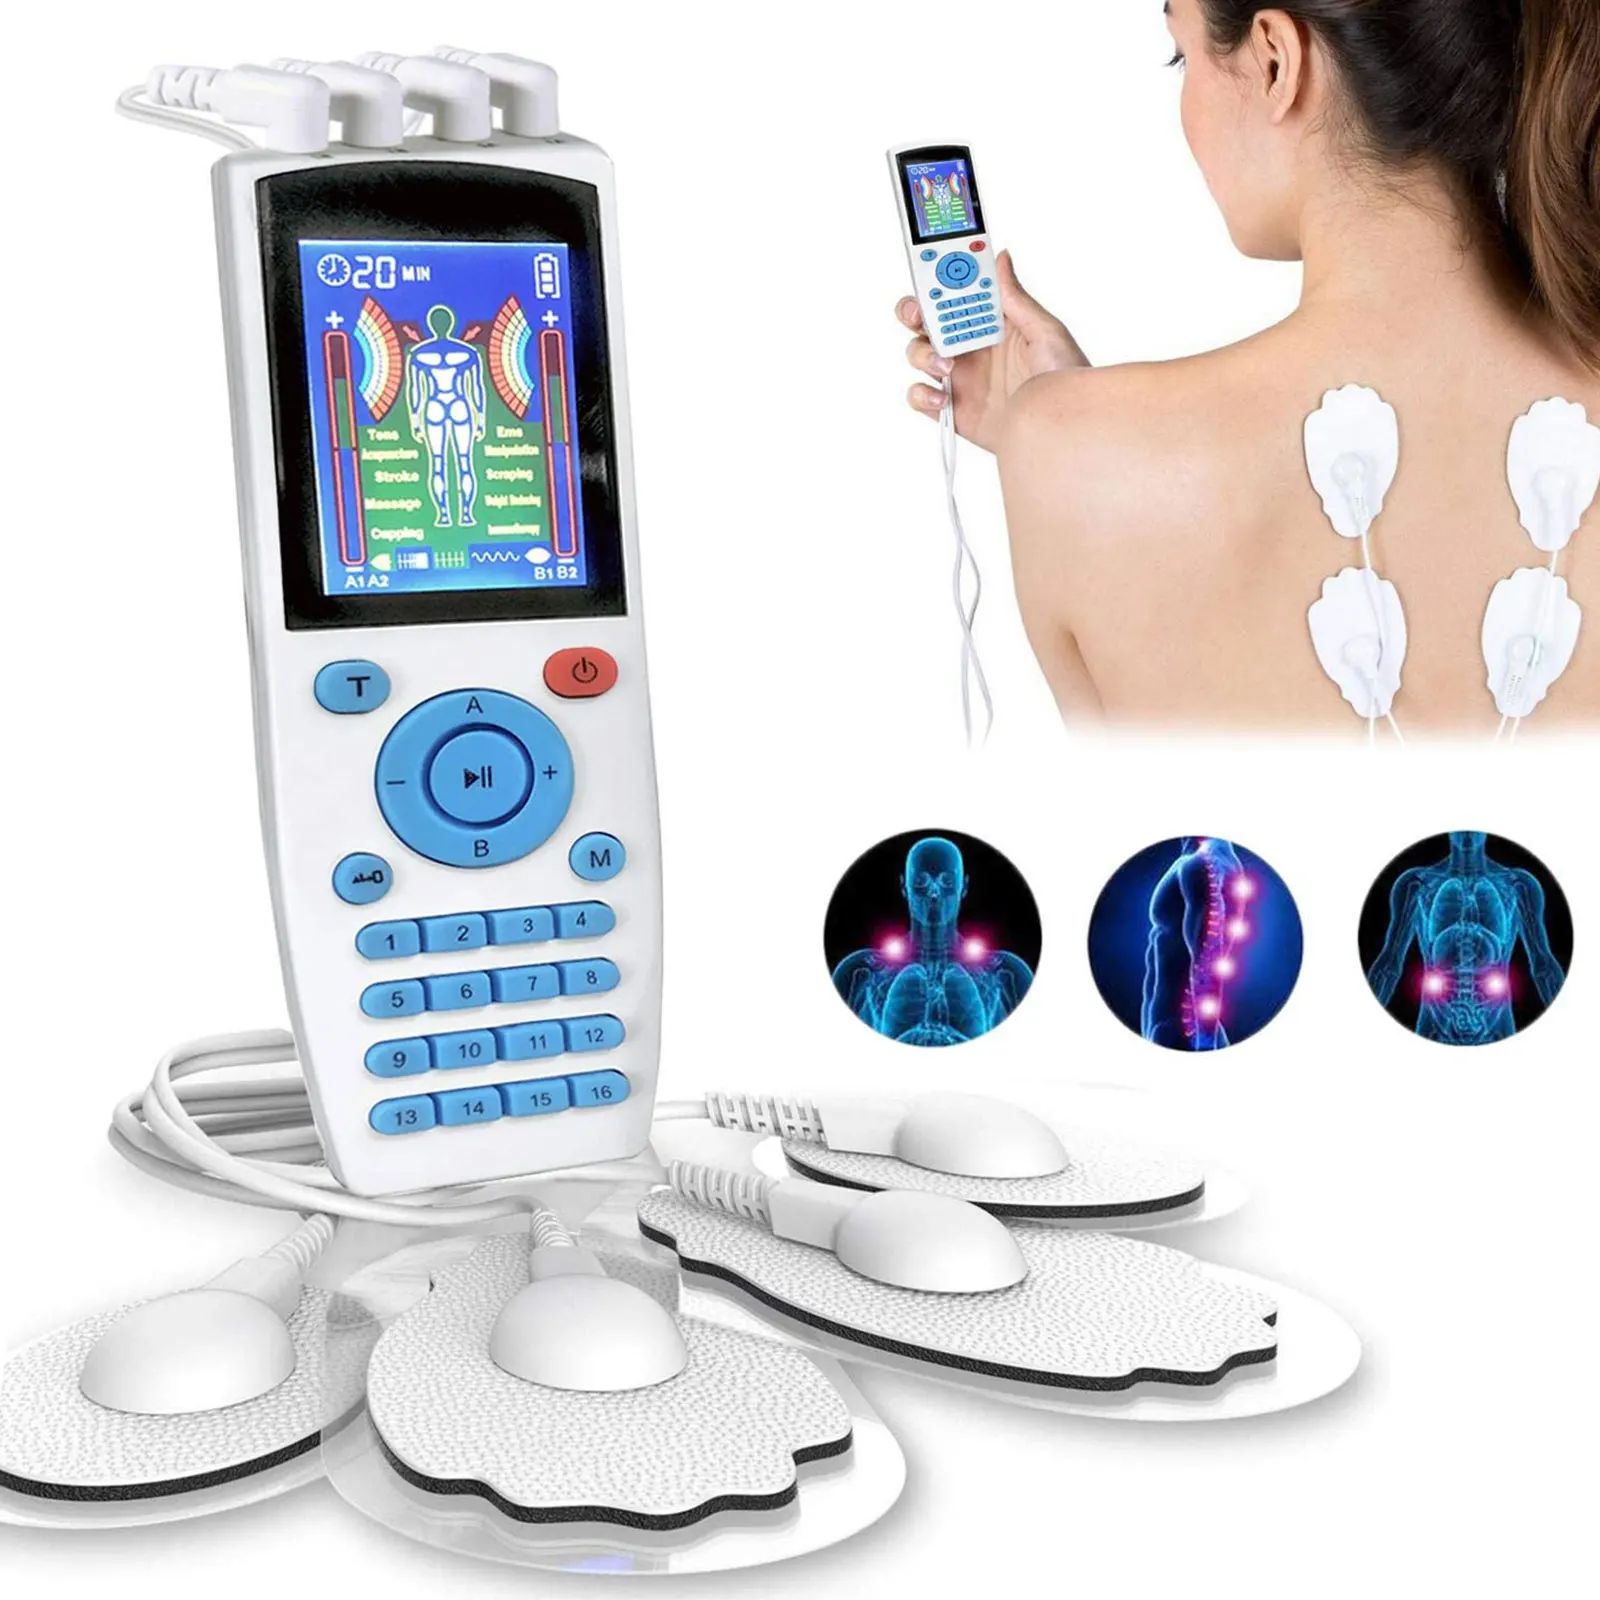 

16 Modes EMS Eletric Compex Muscle Stimulator Electrodes Pulse Physiotherapy TENS Machine 4Channel Massageador Body Pads Therapy